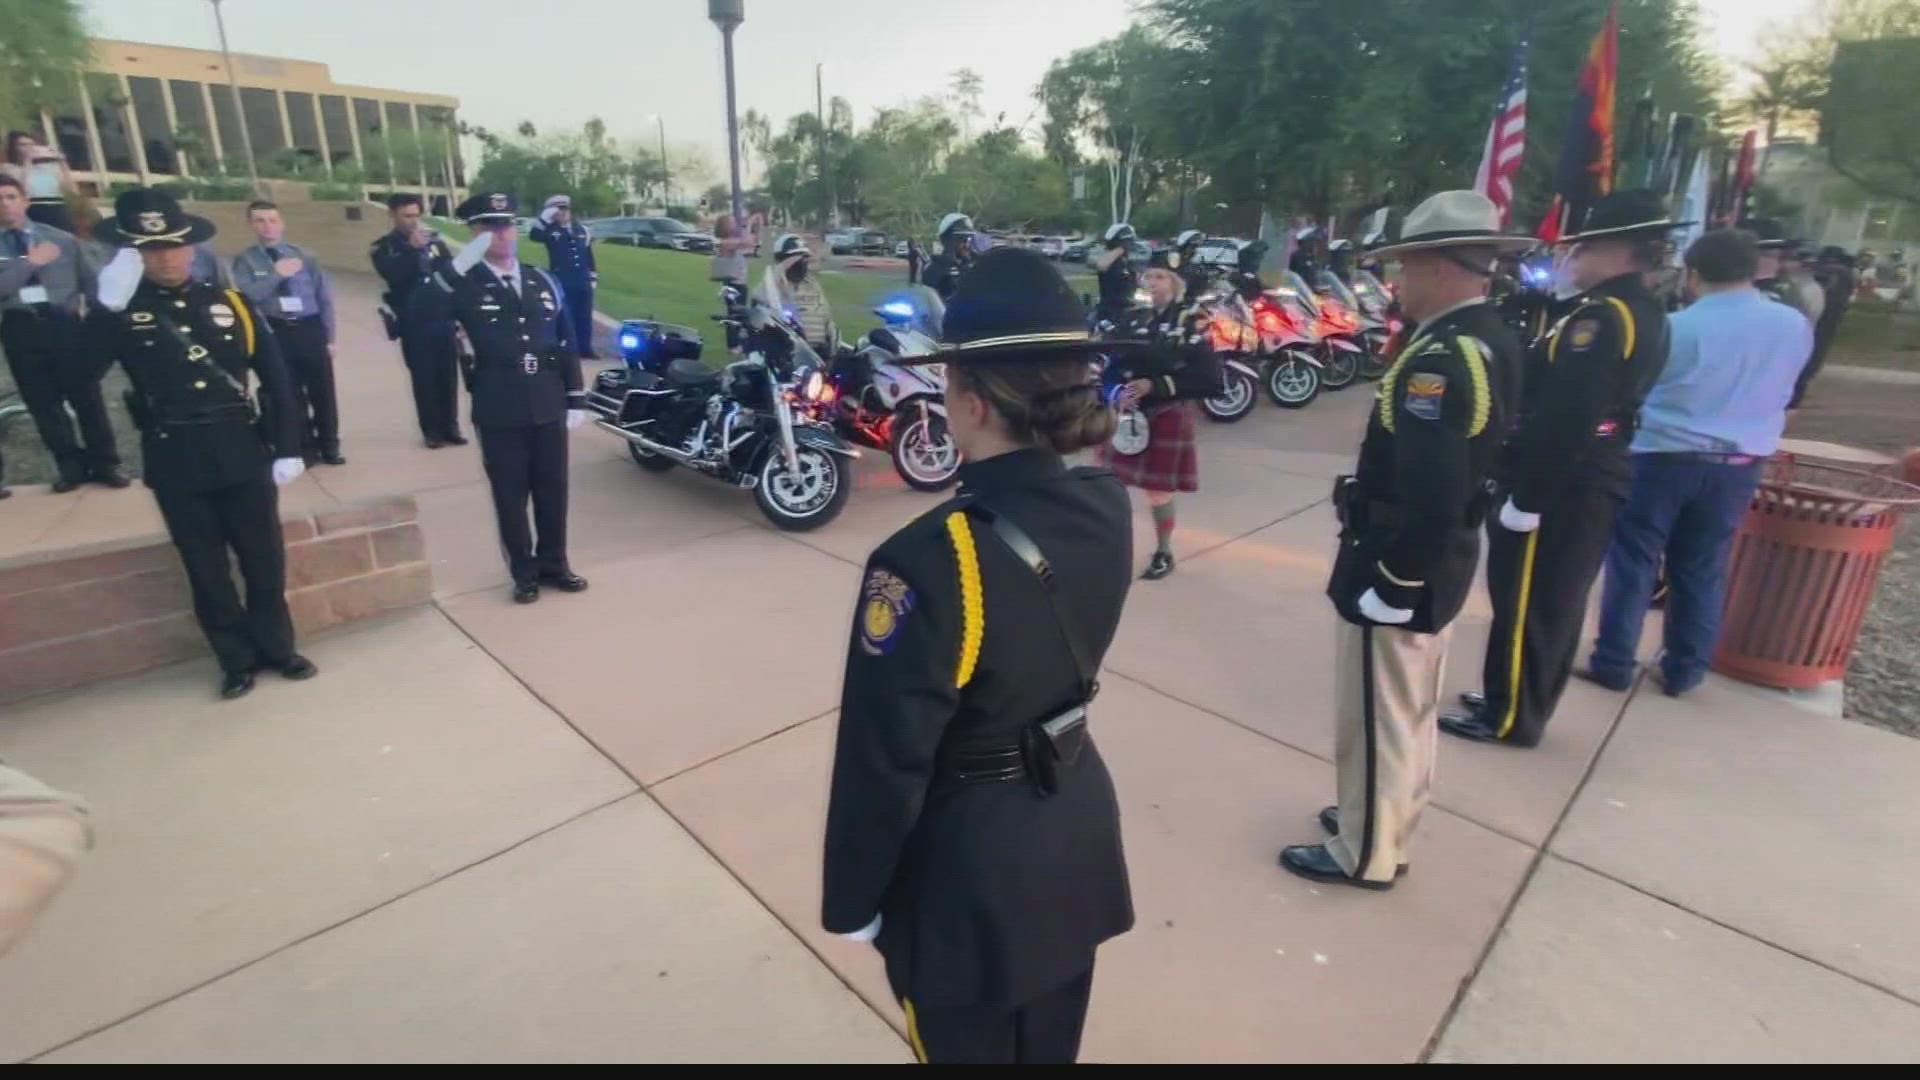 Attorney General Mark Brnovich and Governor Doug Ducey gathered with members of local, statewide, and federal law enforcement, family and colleagues to honor Arizona